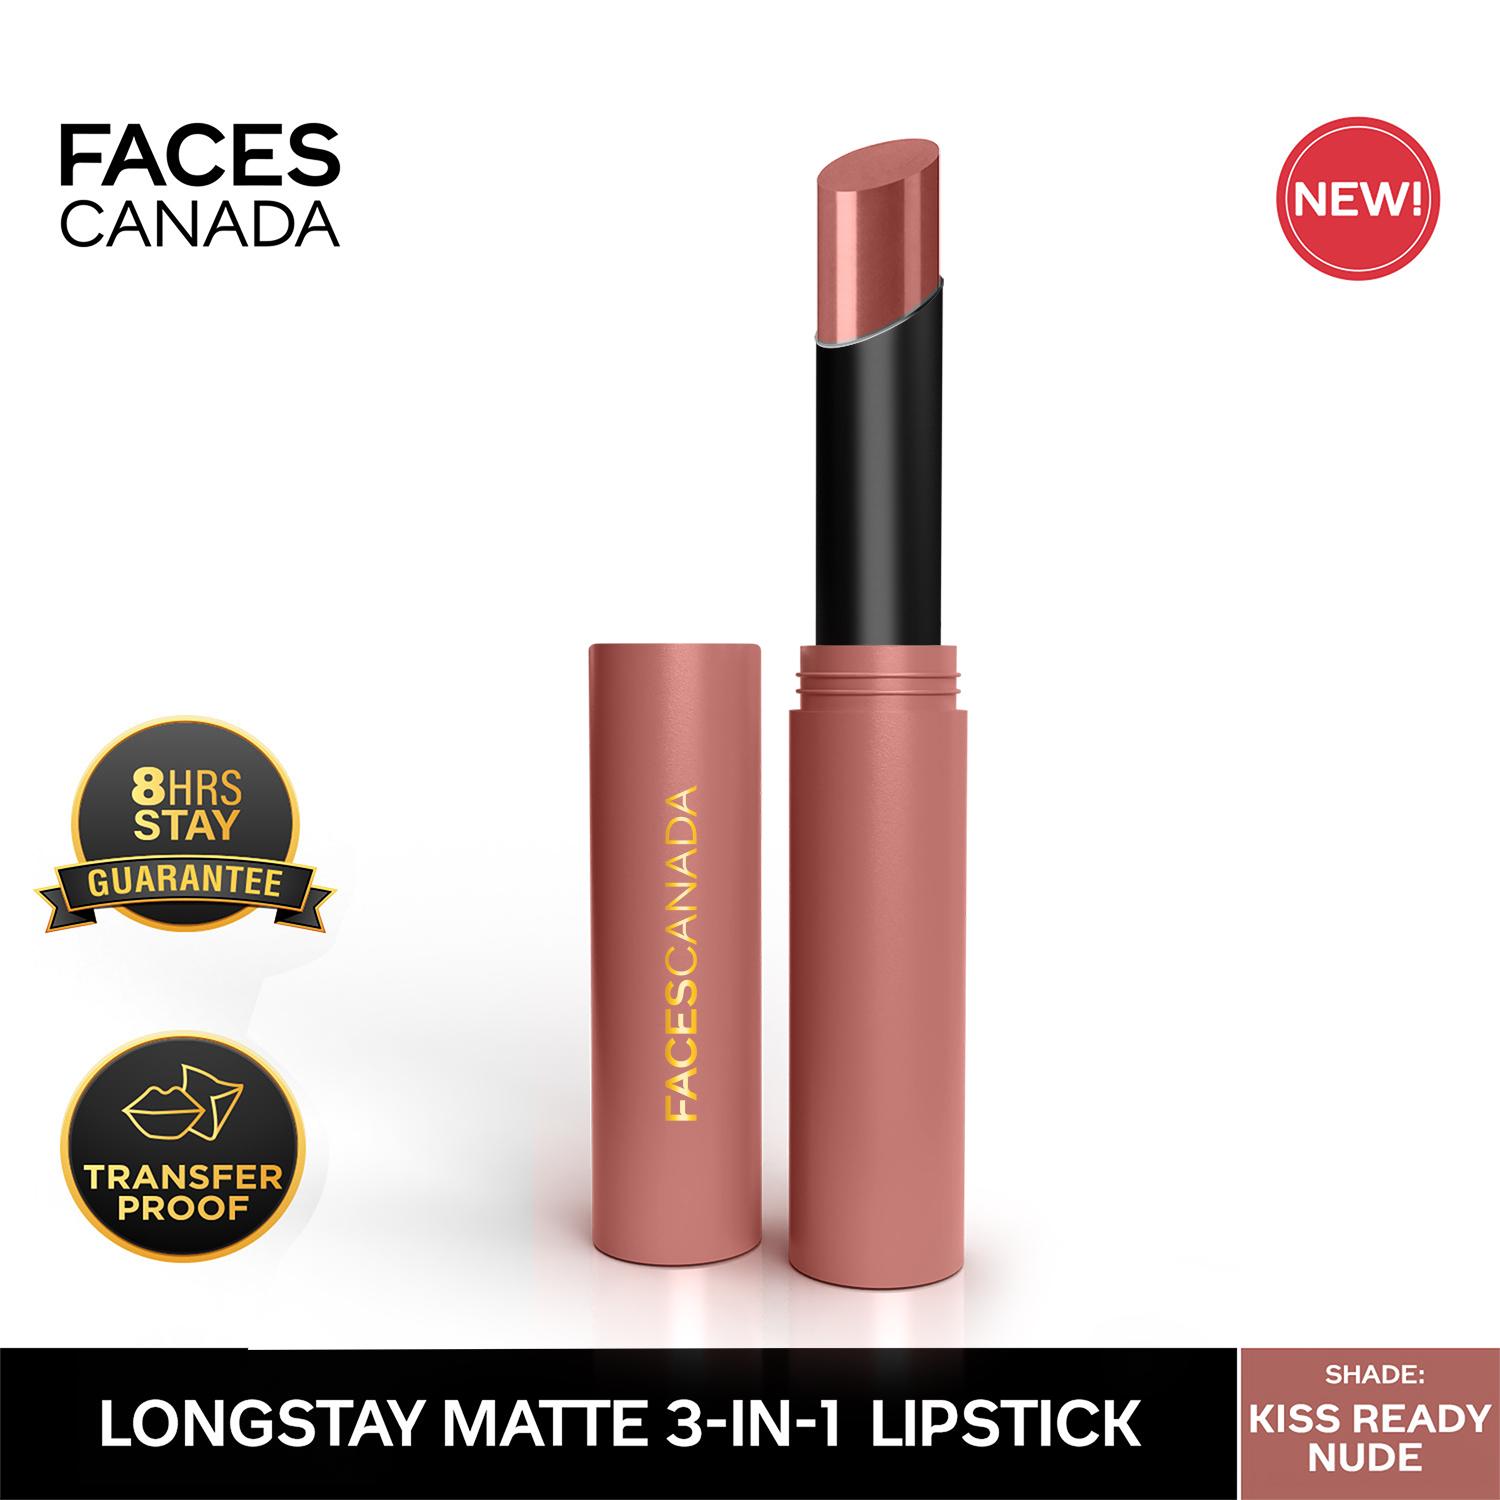 Faces Canada | Faces Canada Long Stay 3-in-1 Matte Lipstick - Kiss Ready Nude 03, 8HR Stay, Primer-Infused (2 g)